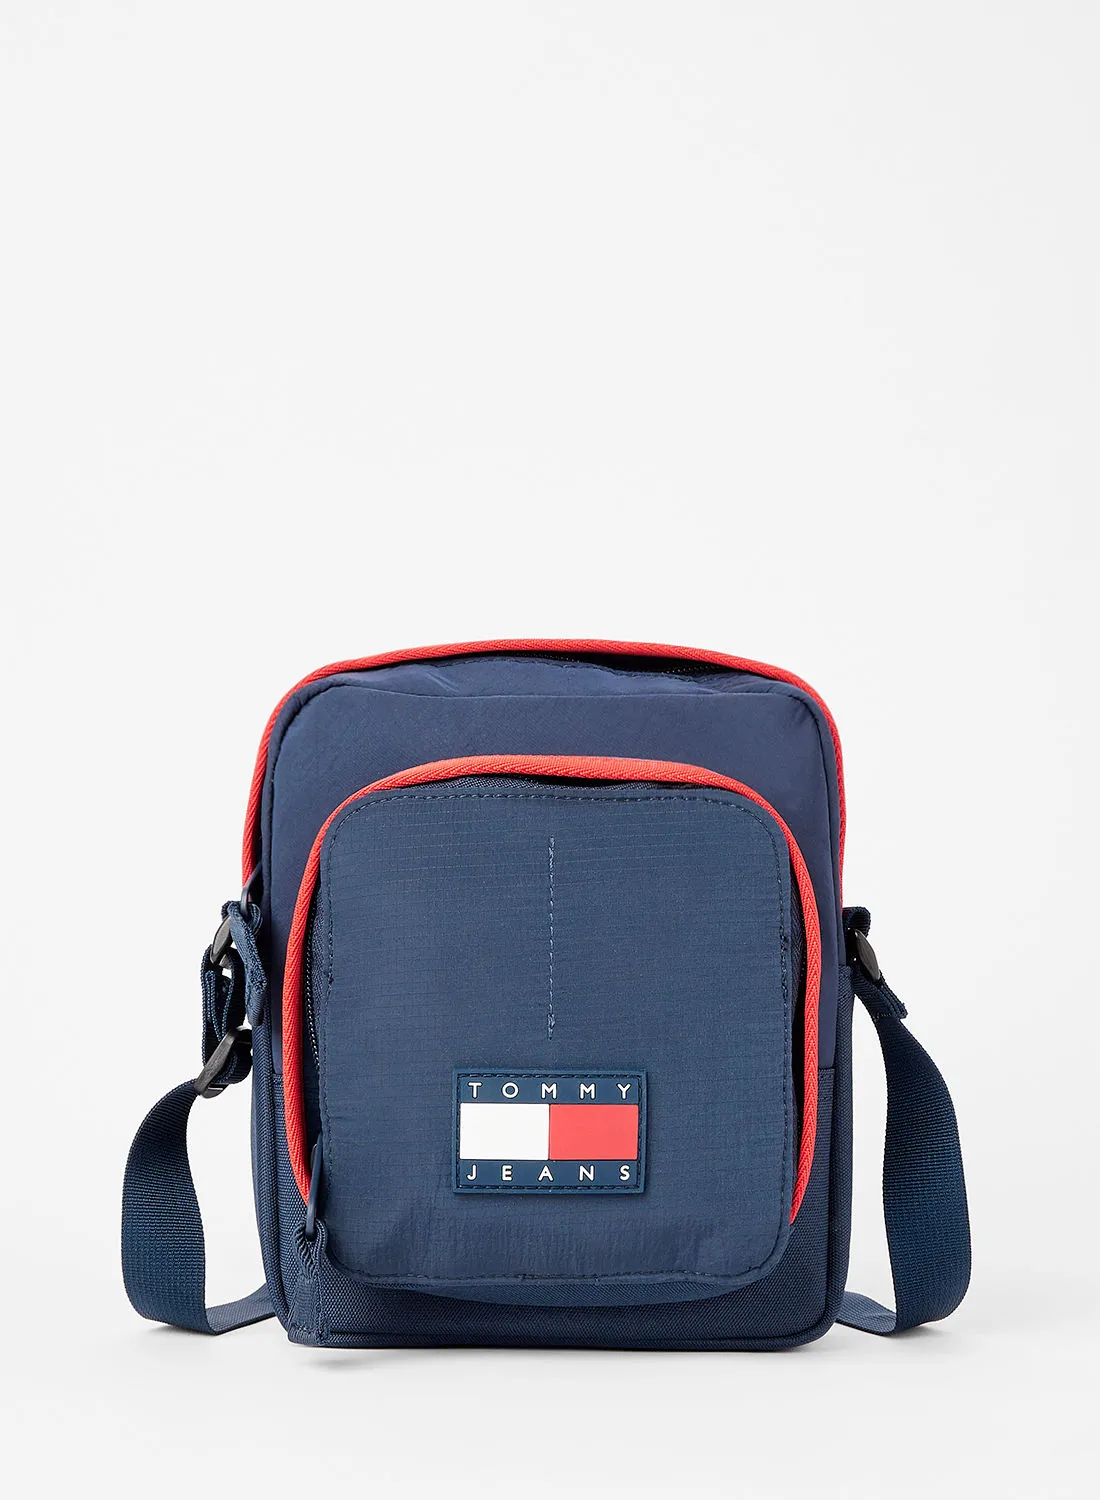 TOMMY JEANS Urban Tech Reporter Bag Navy